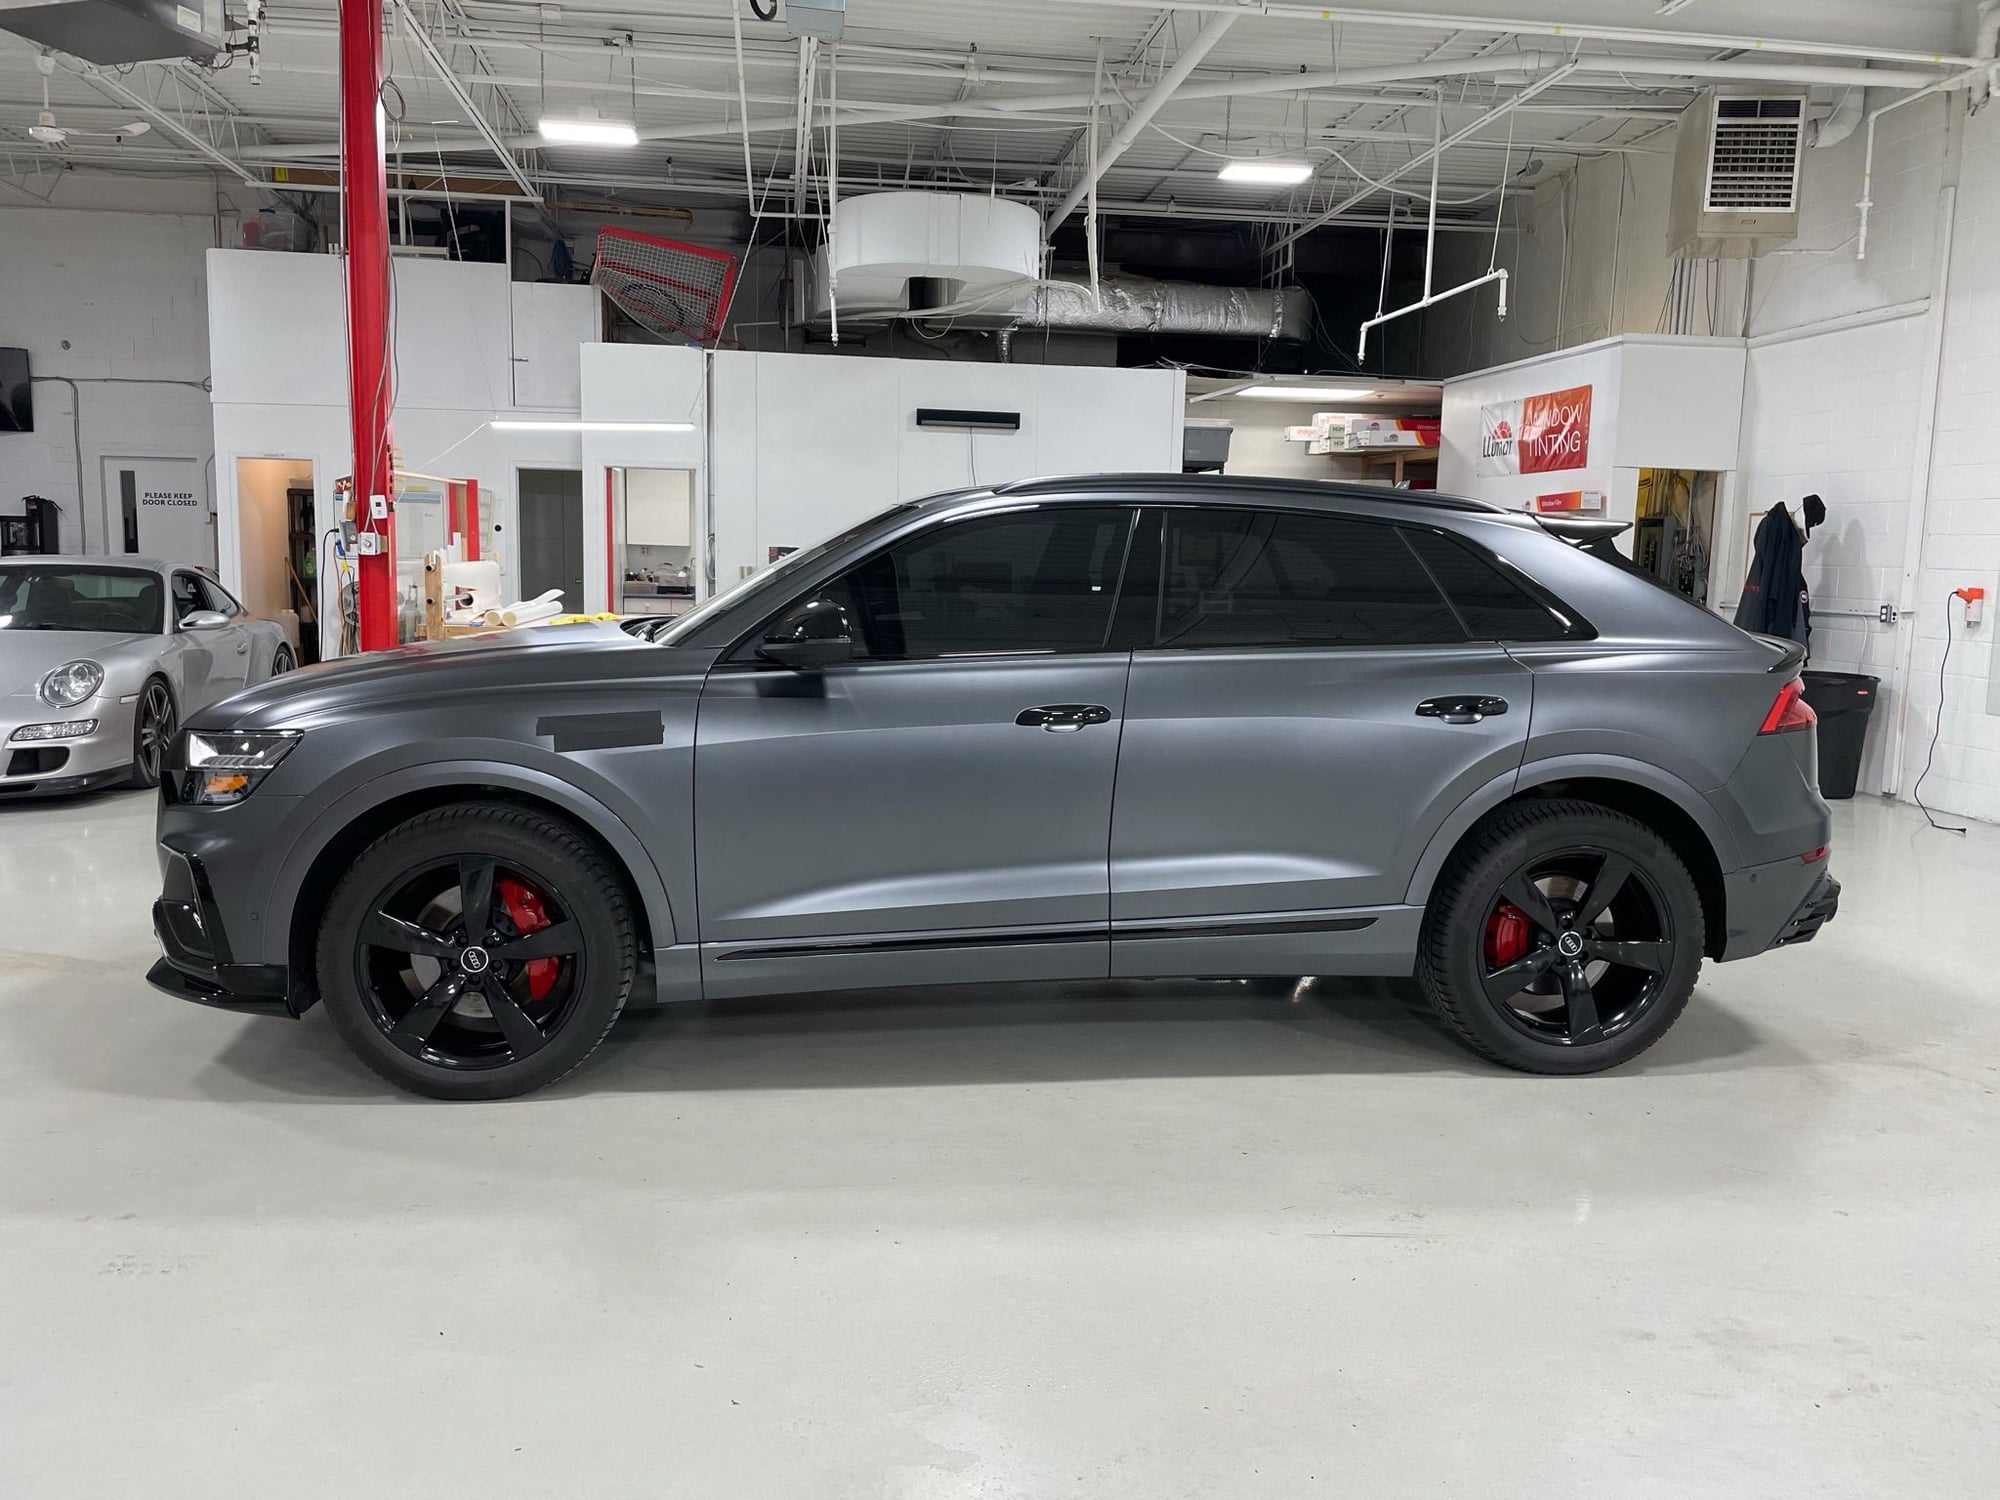 ABT's 799 HP Lamborghini Urus: For When You Need To Scat In A